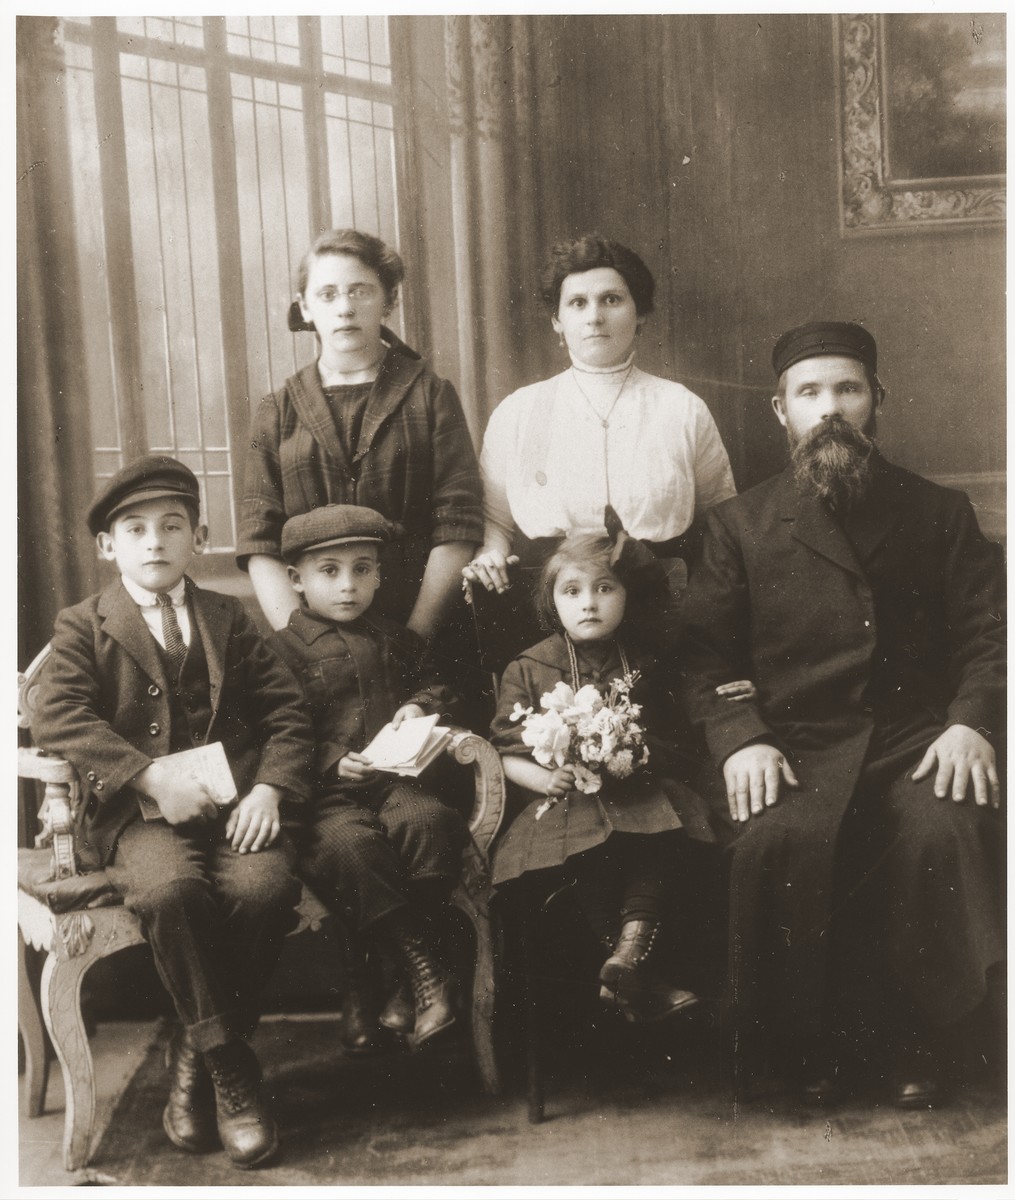 Formal portrait of the Dresner family in Lazy, Poland.

Standing from left to right are Fajgale, Dawid-Zelig and Chana Dresner.  Seated are Mosze-Szmuel and Cirele Dresner.